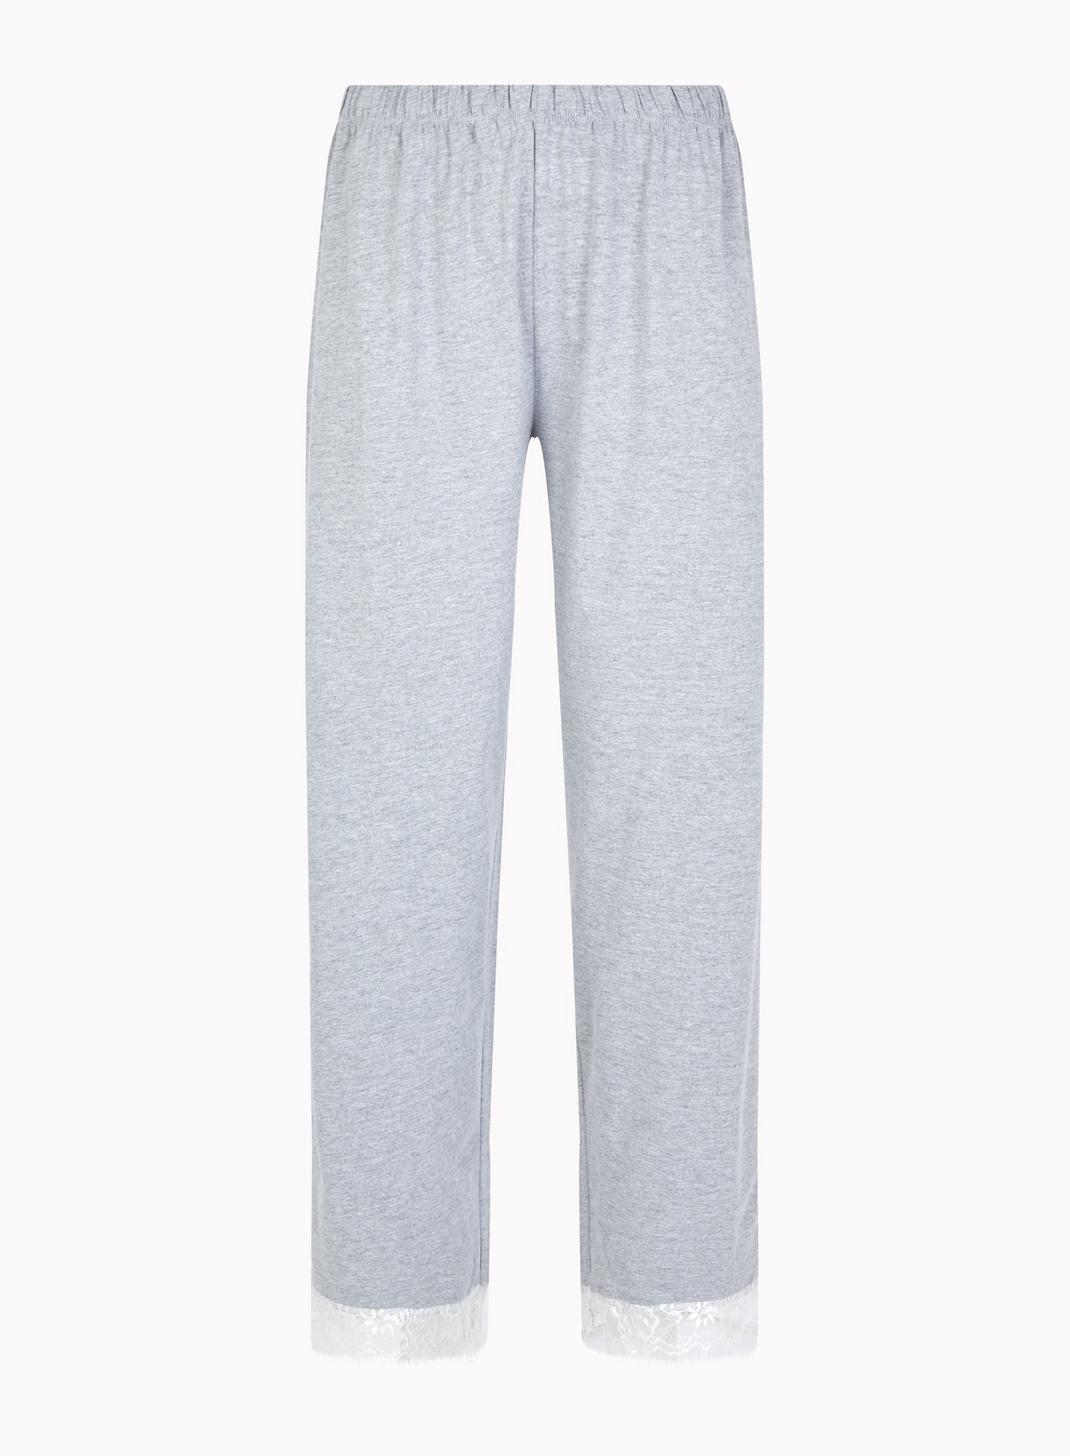 131 Grey Jersey Trousers image number 2